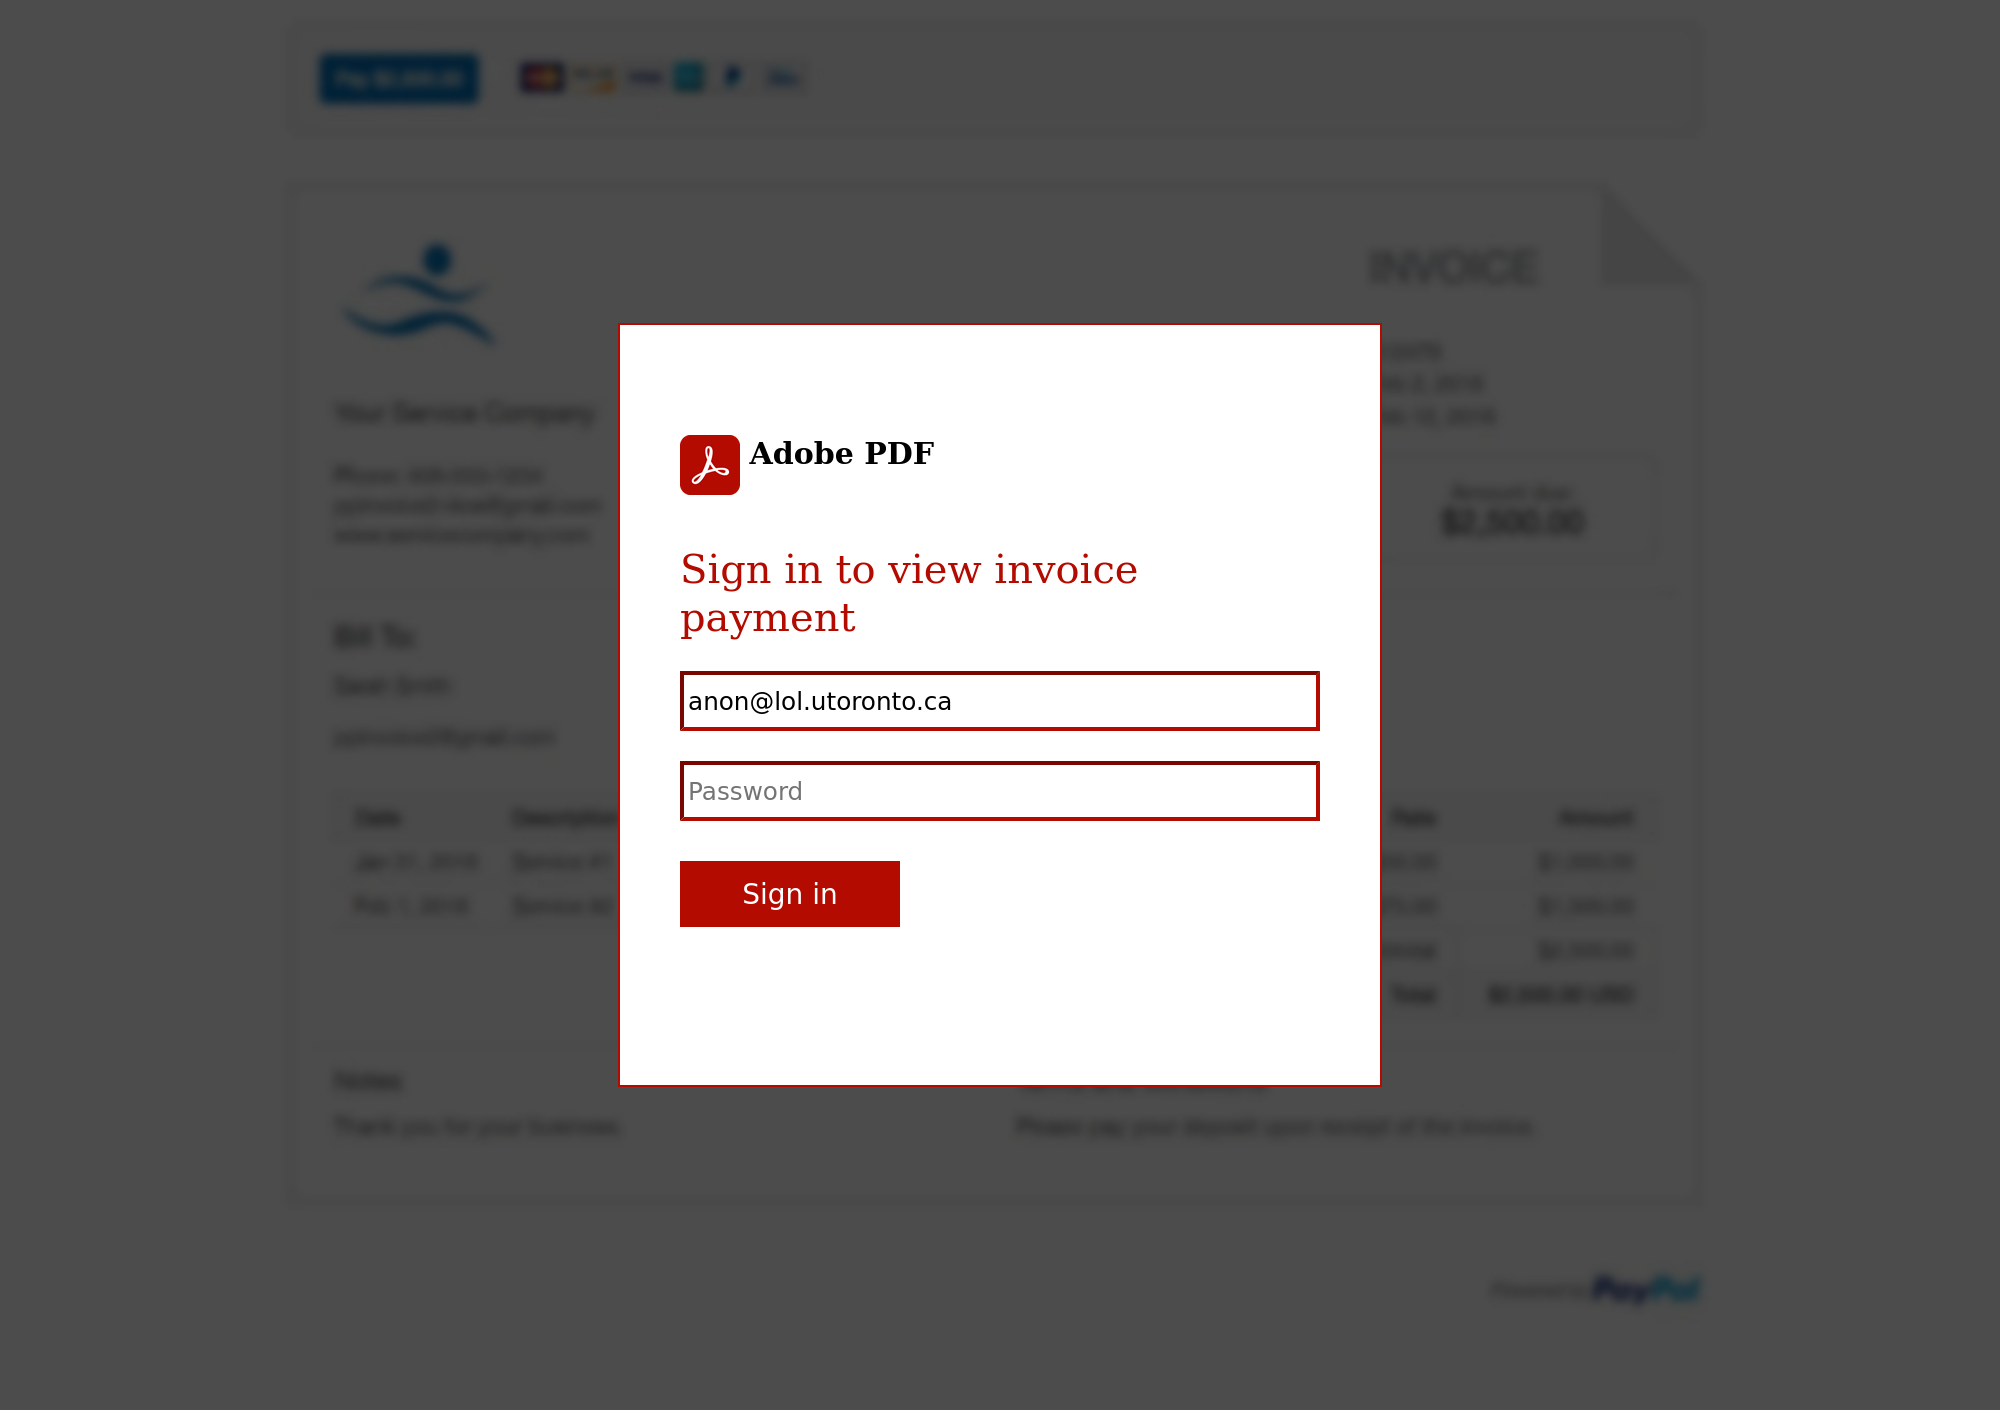 A blurred invoice in the background with an 'Adobe PDF / Sign in to view invoice payment' dialog on top, asking for your password.